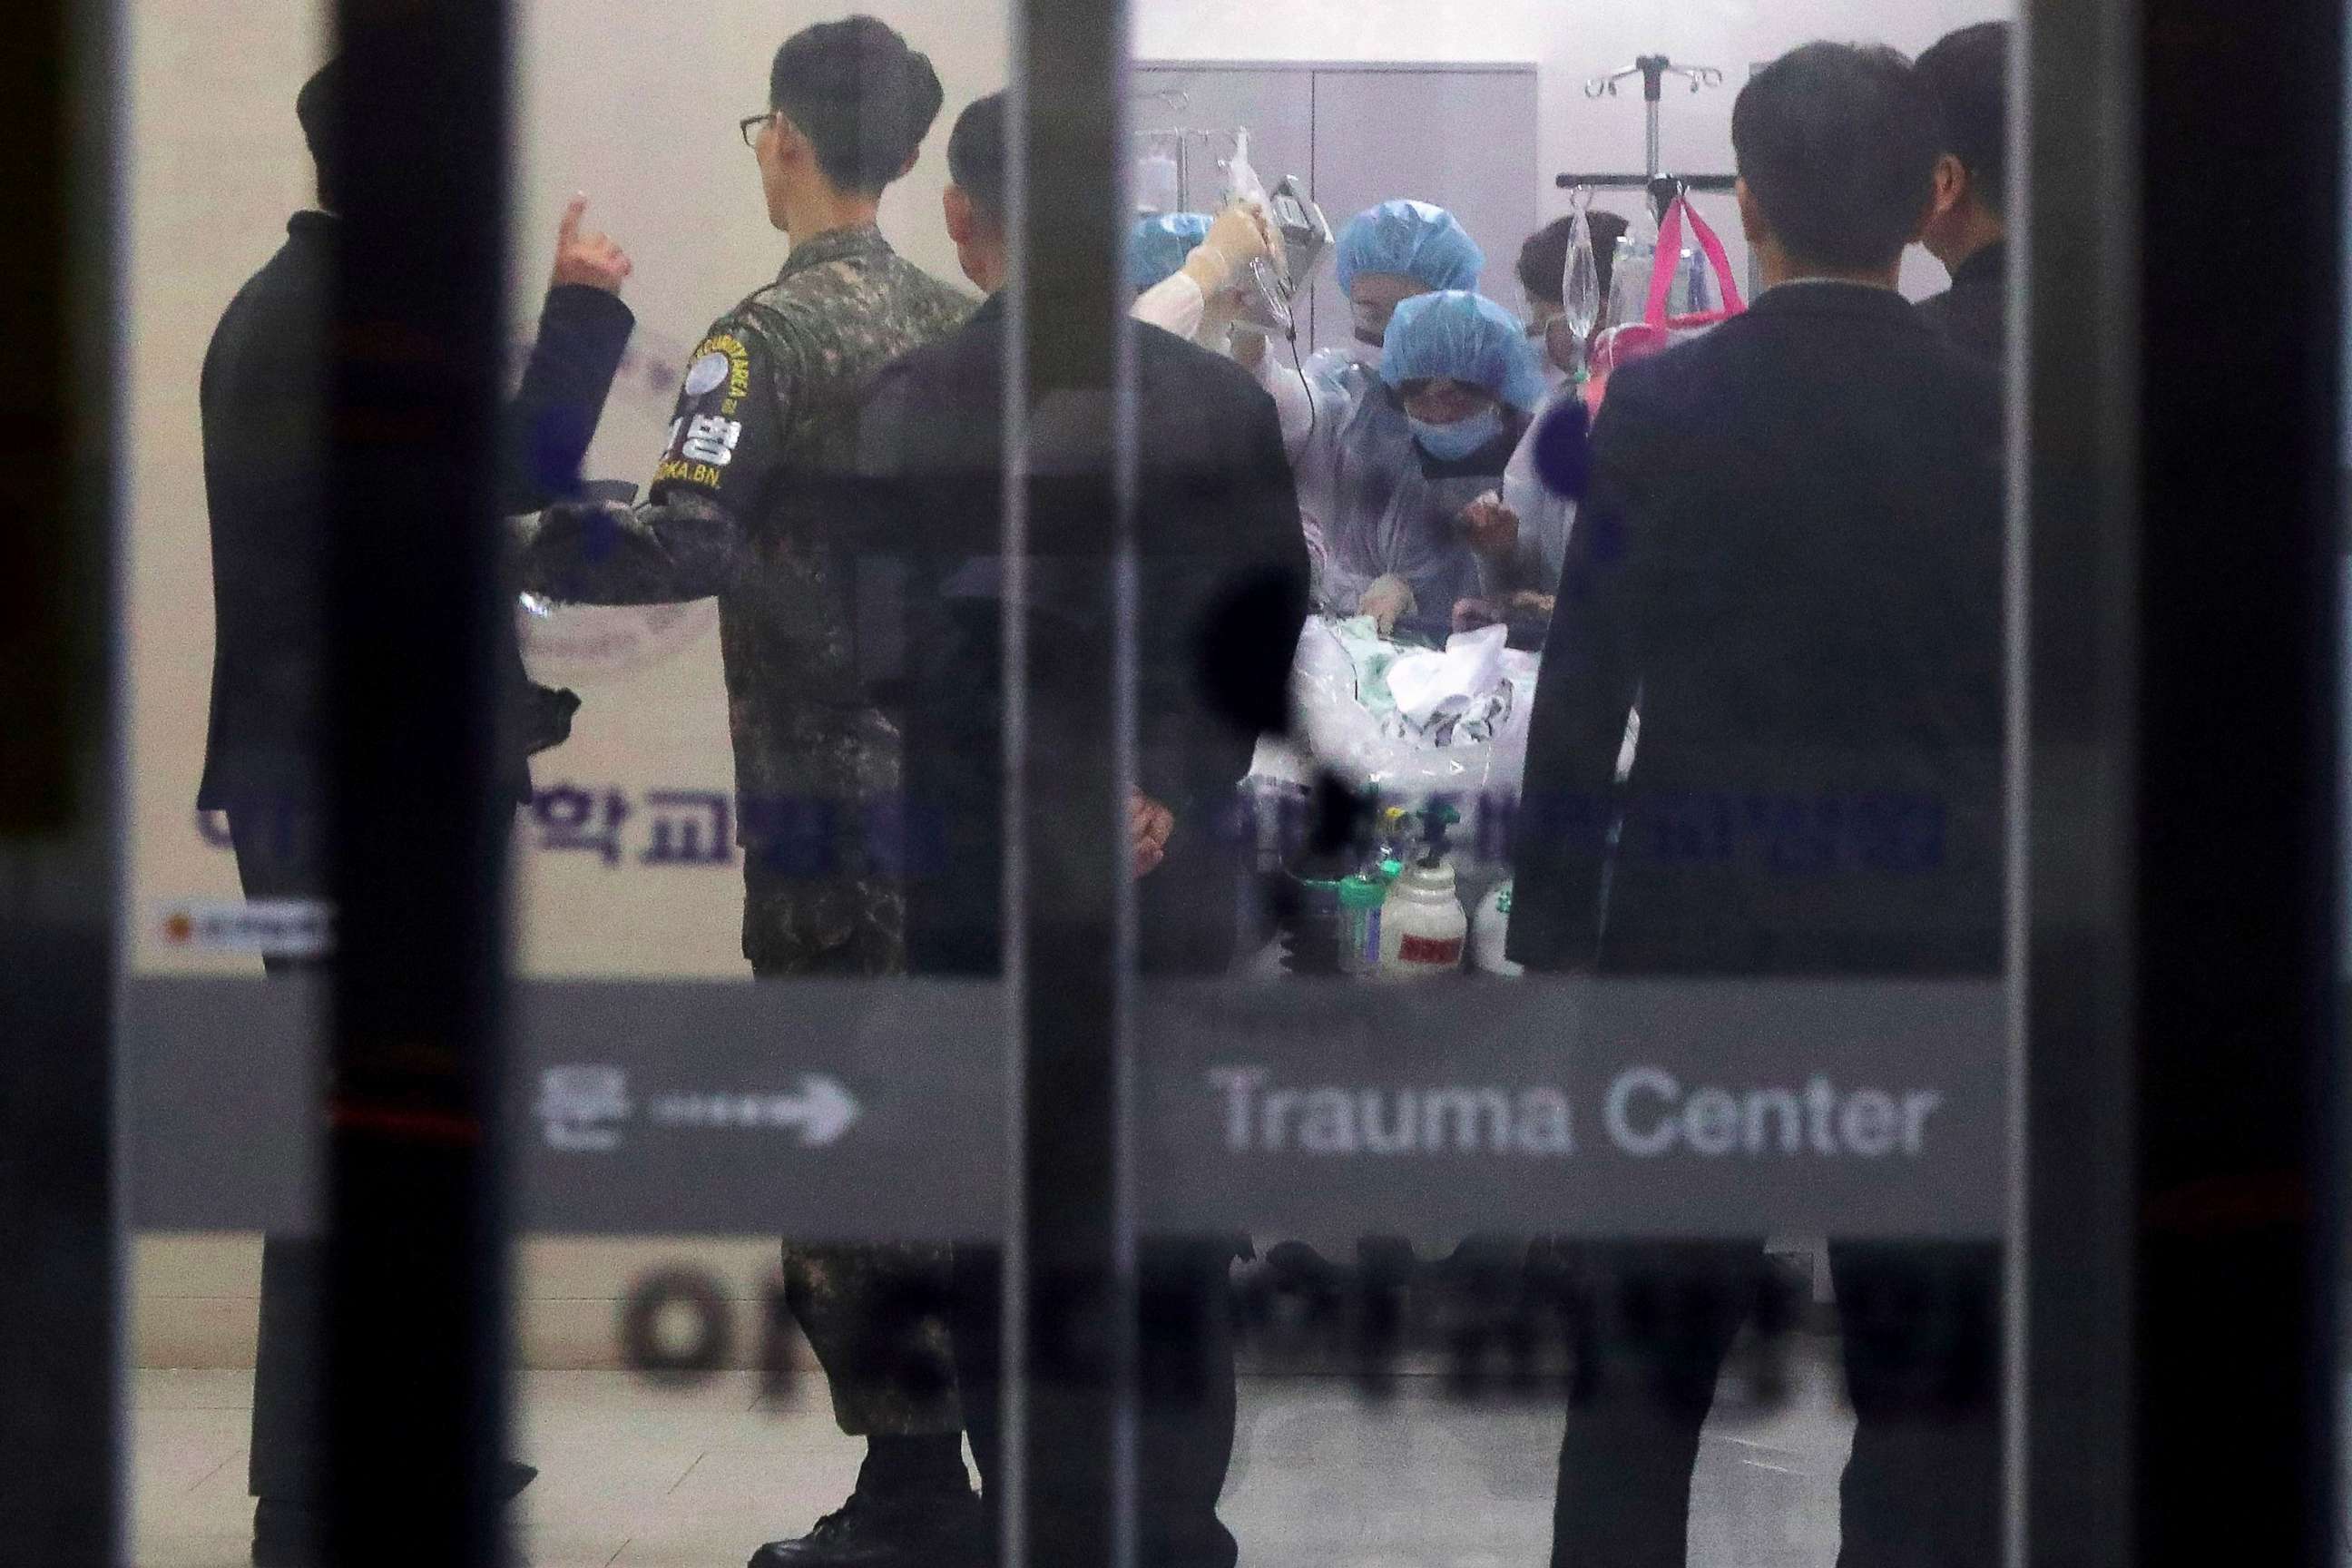 PHOTO: A South Korean military officer looks on as medical members treat an unidentified injured person, believed to be a North Korean soldier who defected, at a hospital in Suwon, South Korea, Nov. 13, 2017.